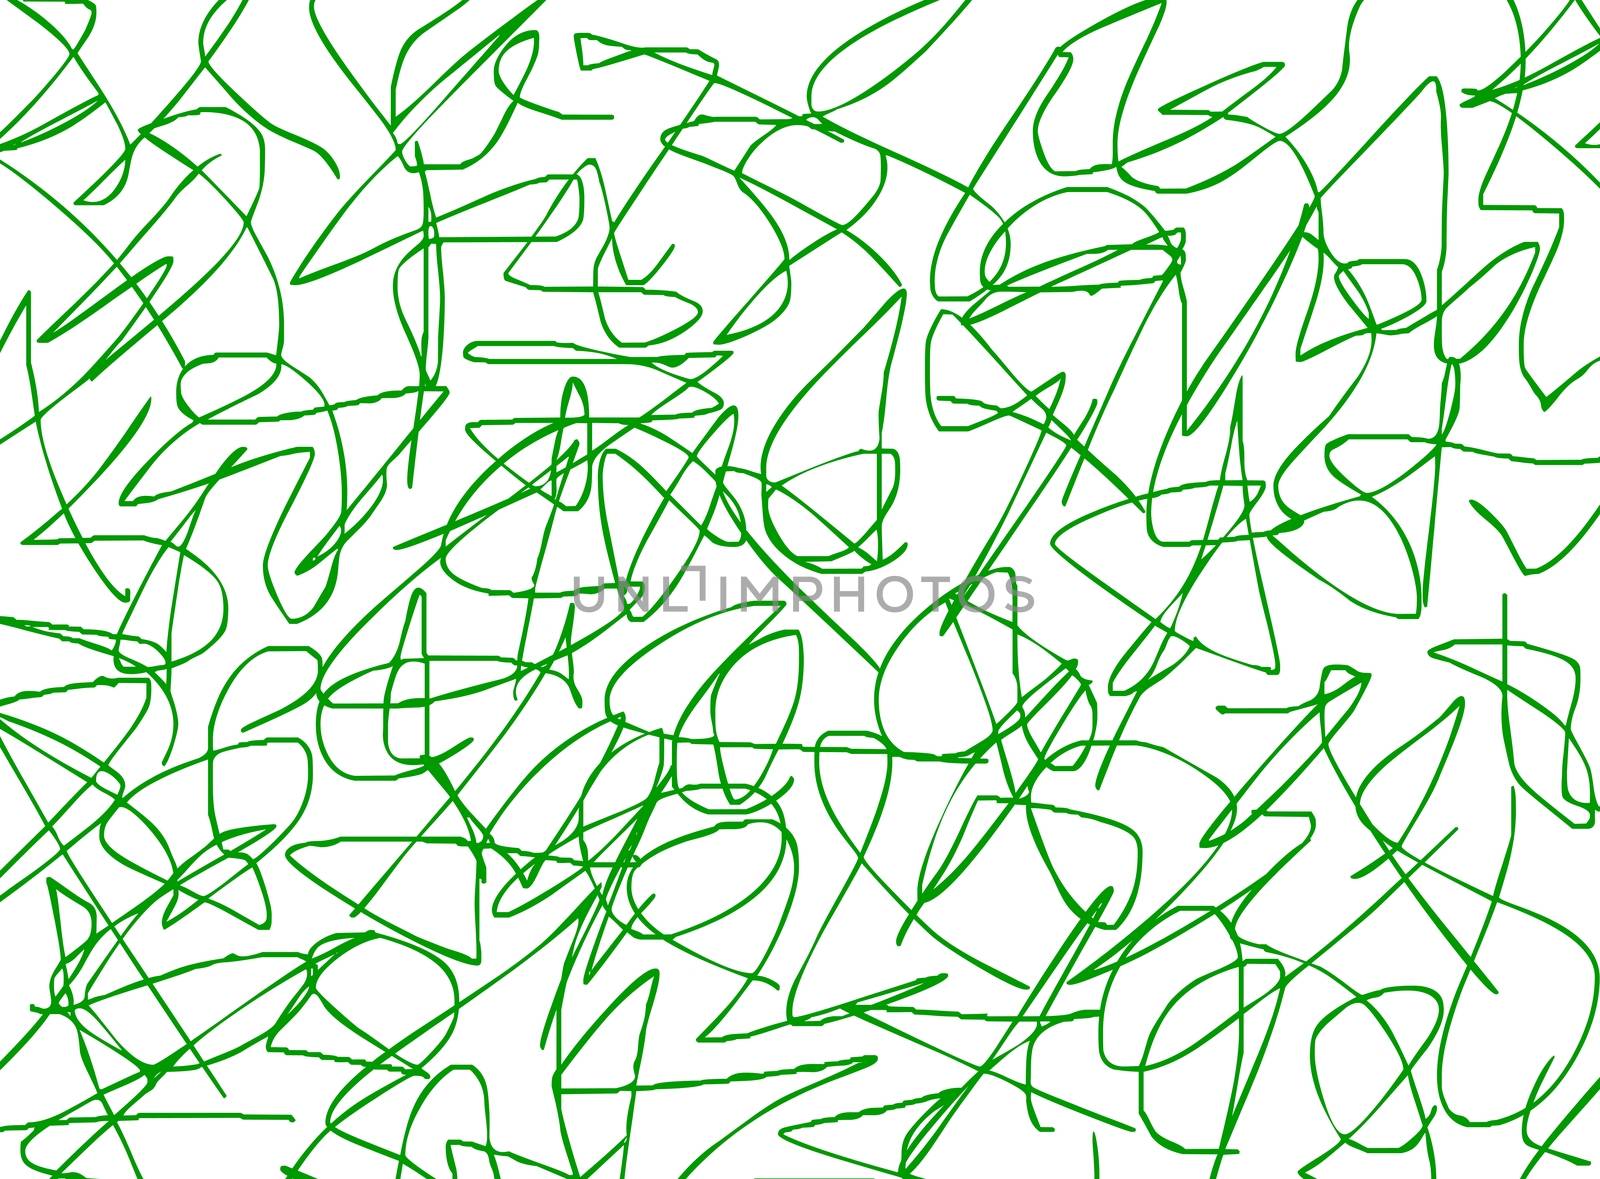 scrawl green on white background. Abstract illustration scribble. children drawing doodles. babies who write. marking text.